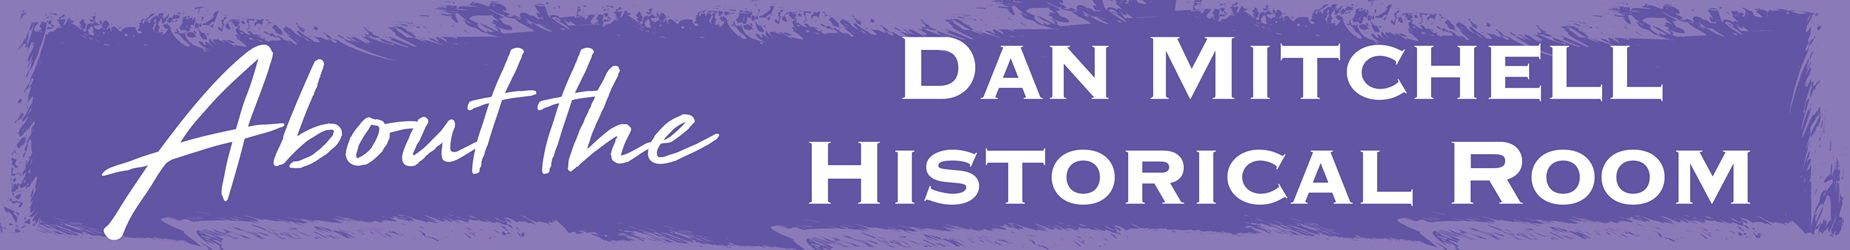 About the Dan Mitchell Historical Room